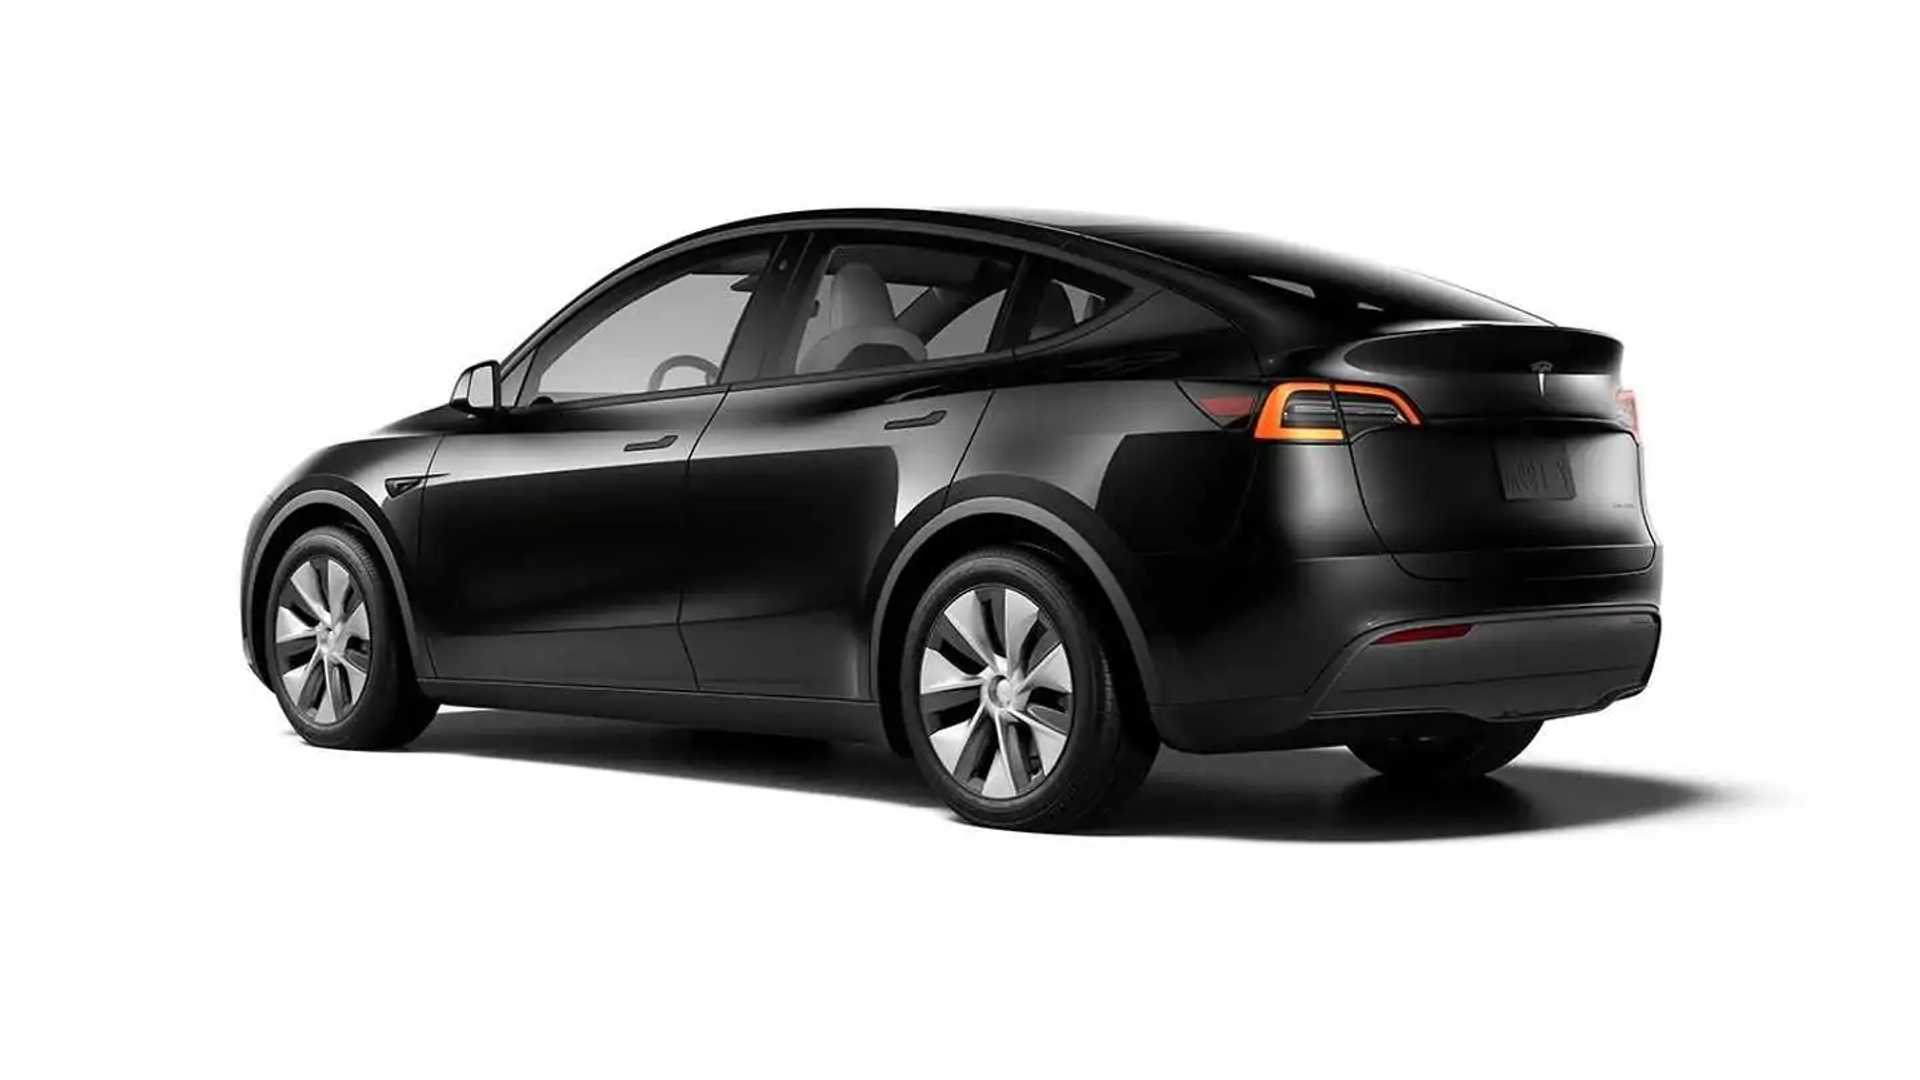 tesla offers six months of free supercharging for new model 3, model y purchases